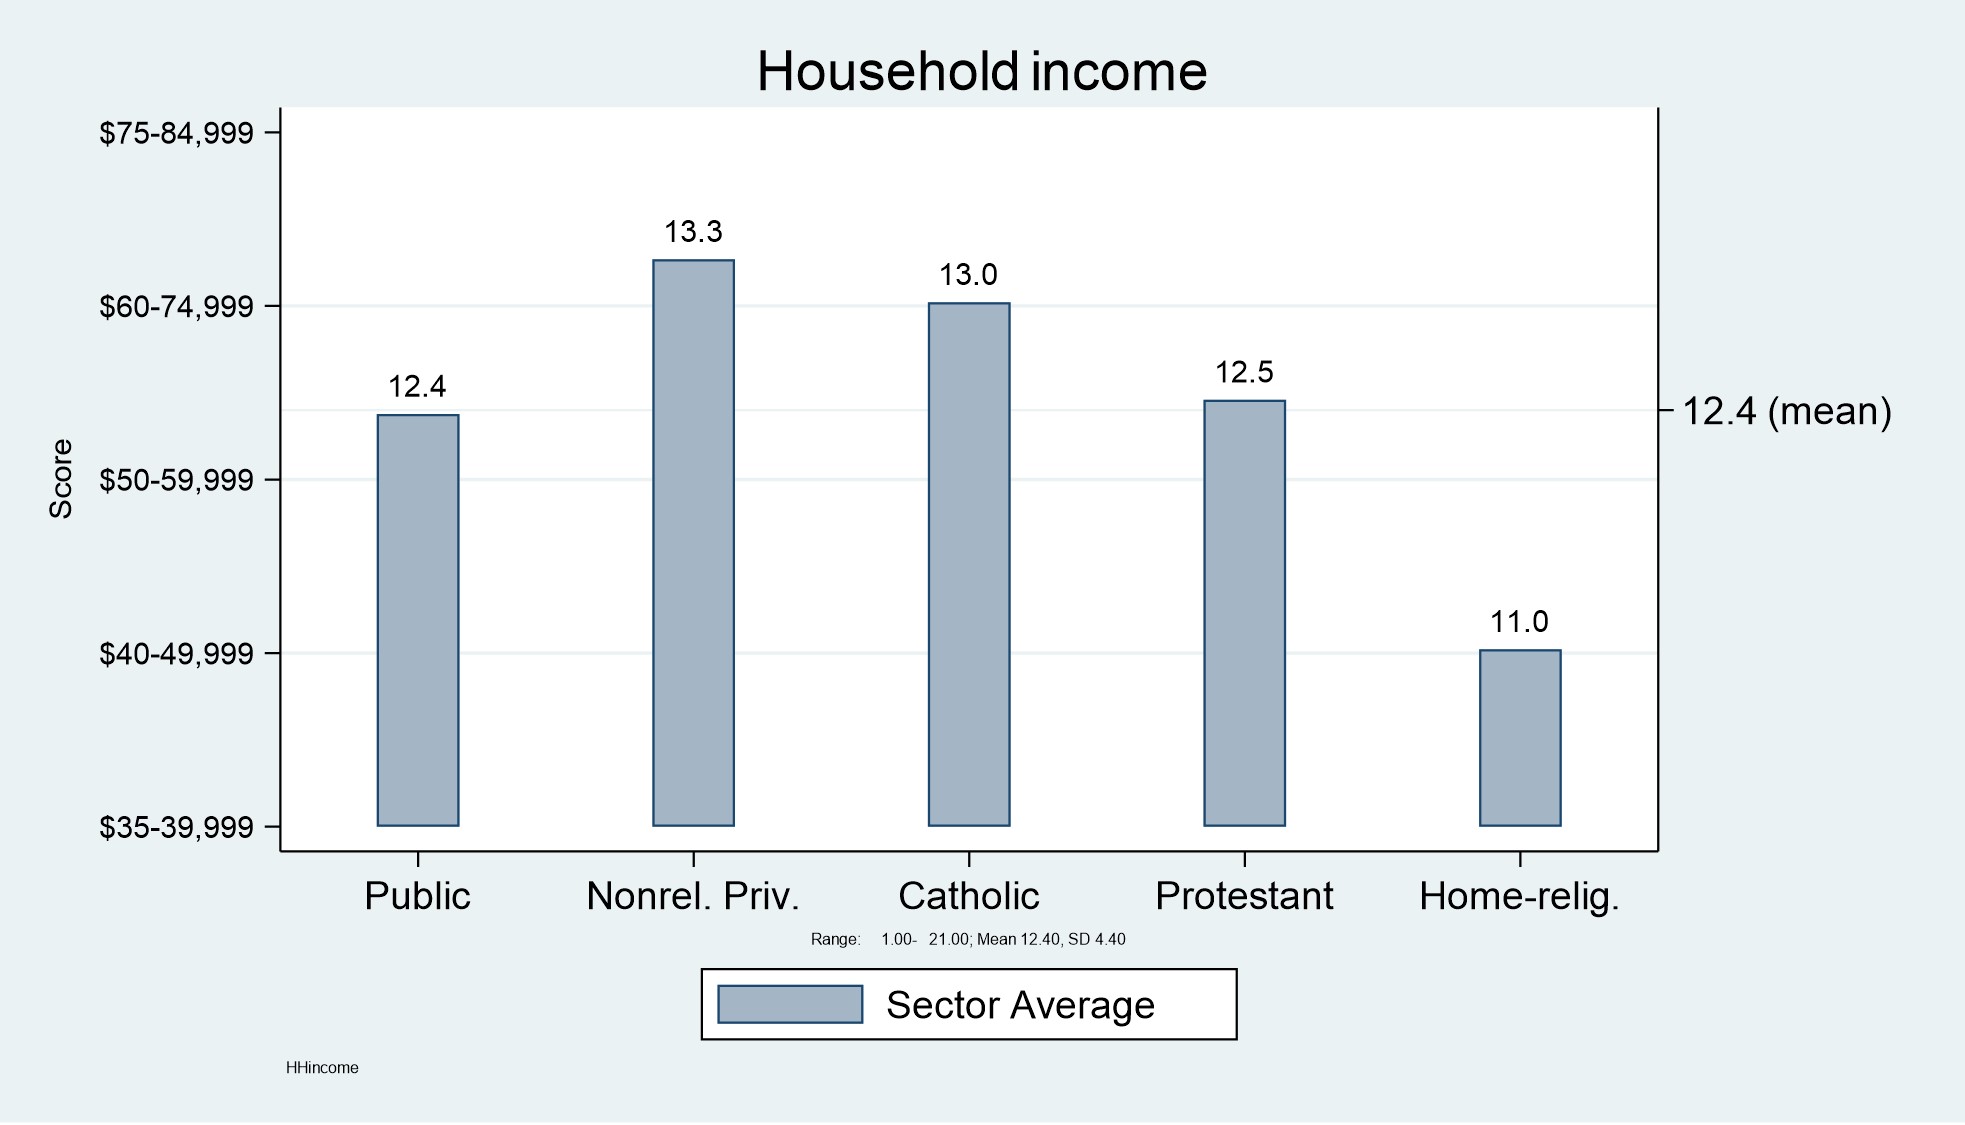 Household income